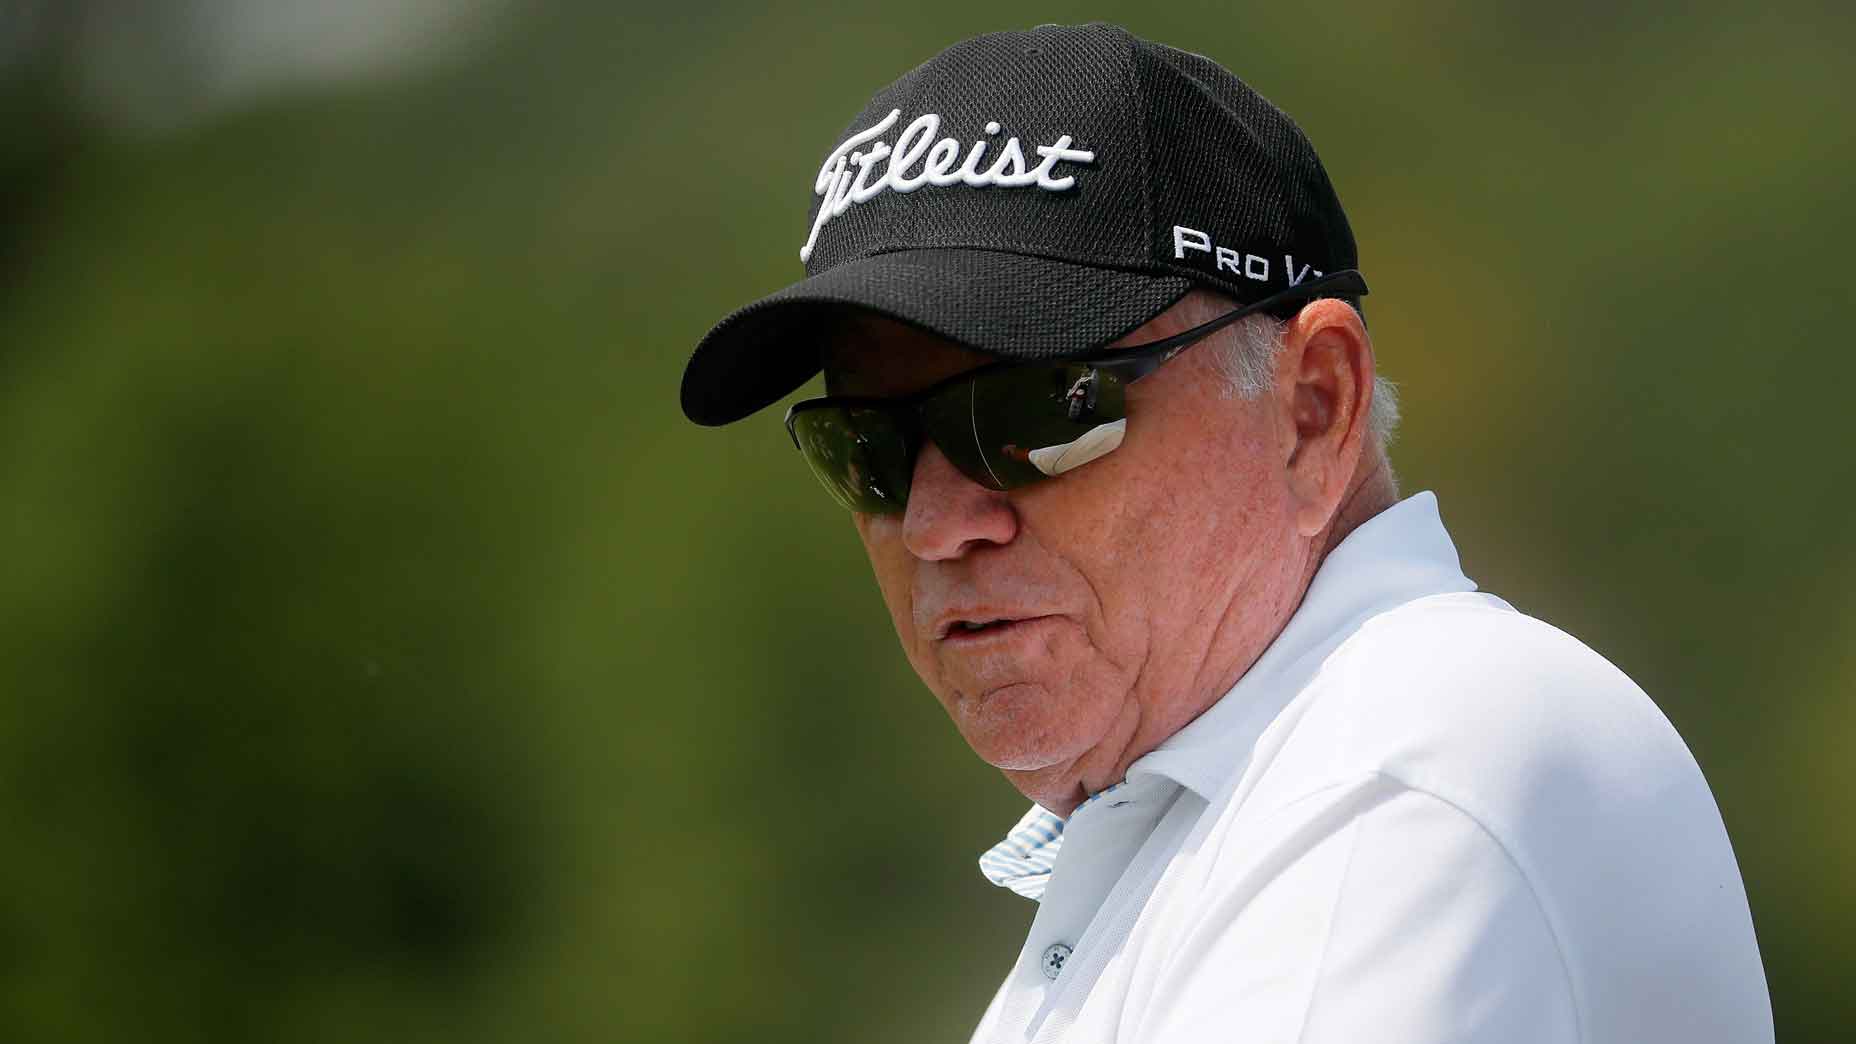 Coach Butch Harmon looks on at the range during the third round of the TOUR Championship at East Lake Golf Club on September 23, 2017 in Atlanta, Georgia.